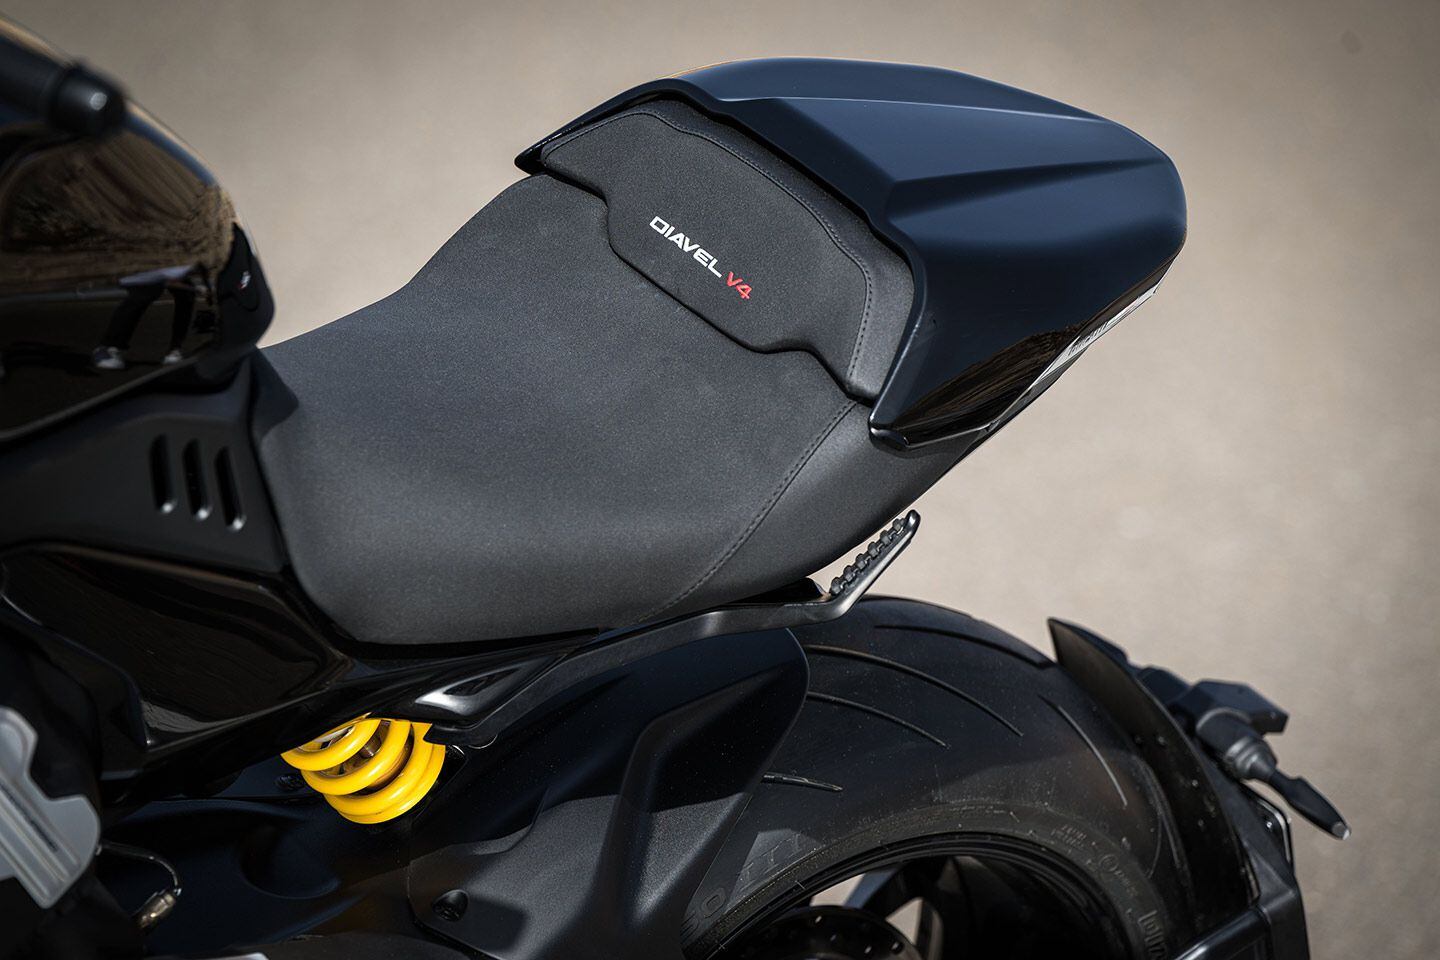 There’s 20mm more space, front to back, on the Diavel V4’s seat.